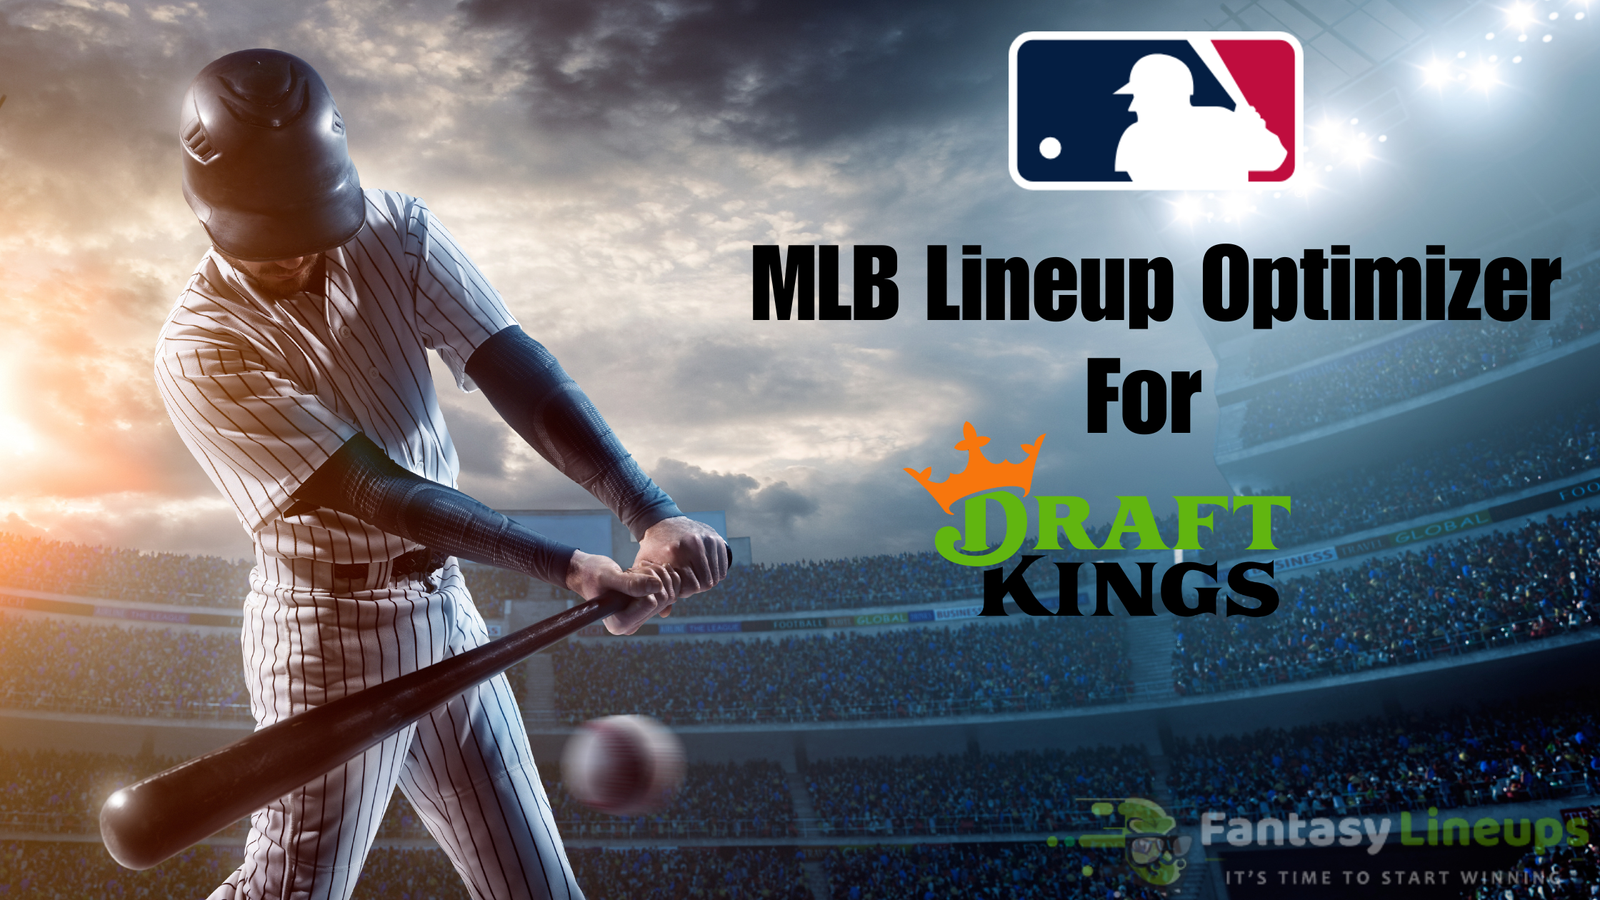 Maximizing Your Fantasy Baseball Success: The Ultimate Guide to Using MLB Lineup Optimizer for DraftKings”